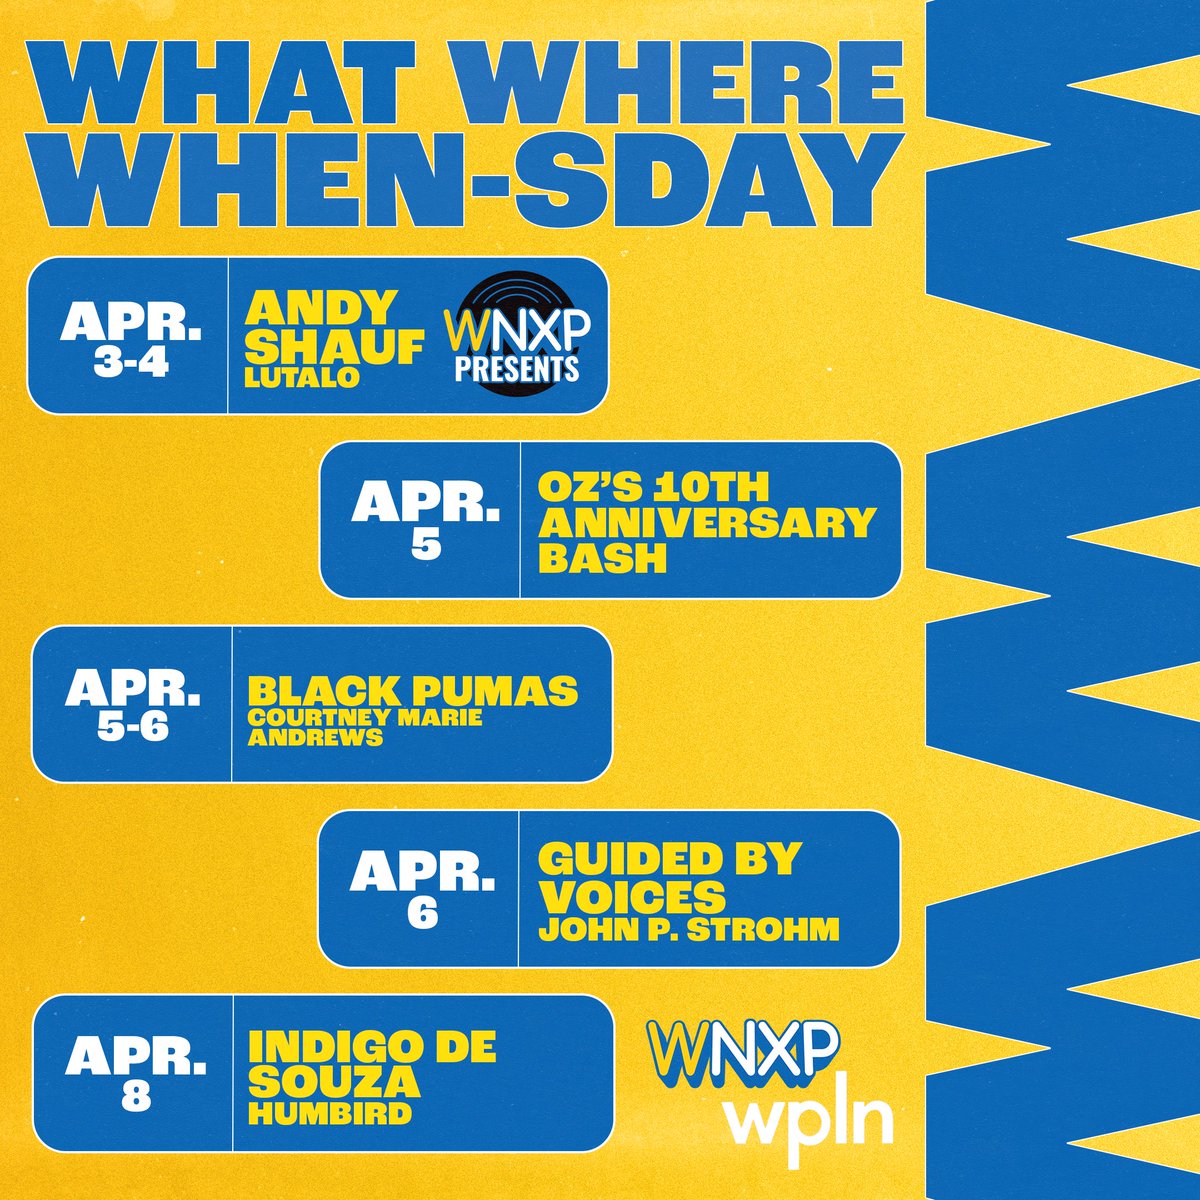 On today's What Where When-sday, we're talking with @OZArtsNashville about their 10th Anniversary Bash! Also this week in Nashville: WNXP Presents @andyshauf, @BlackPumasMusic, @_GuidedByVoices, and @IndigoDeSouza. More here: wnxp.org/what-where-whe…